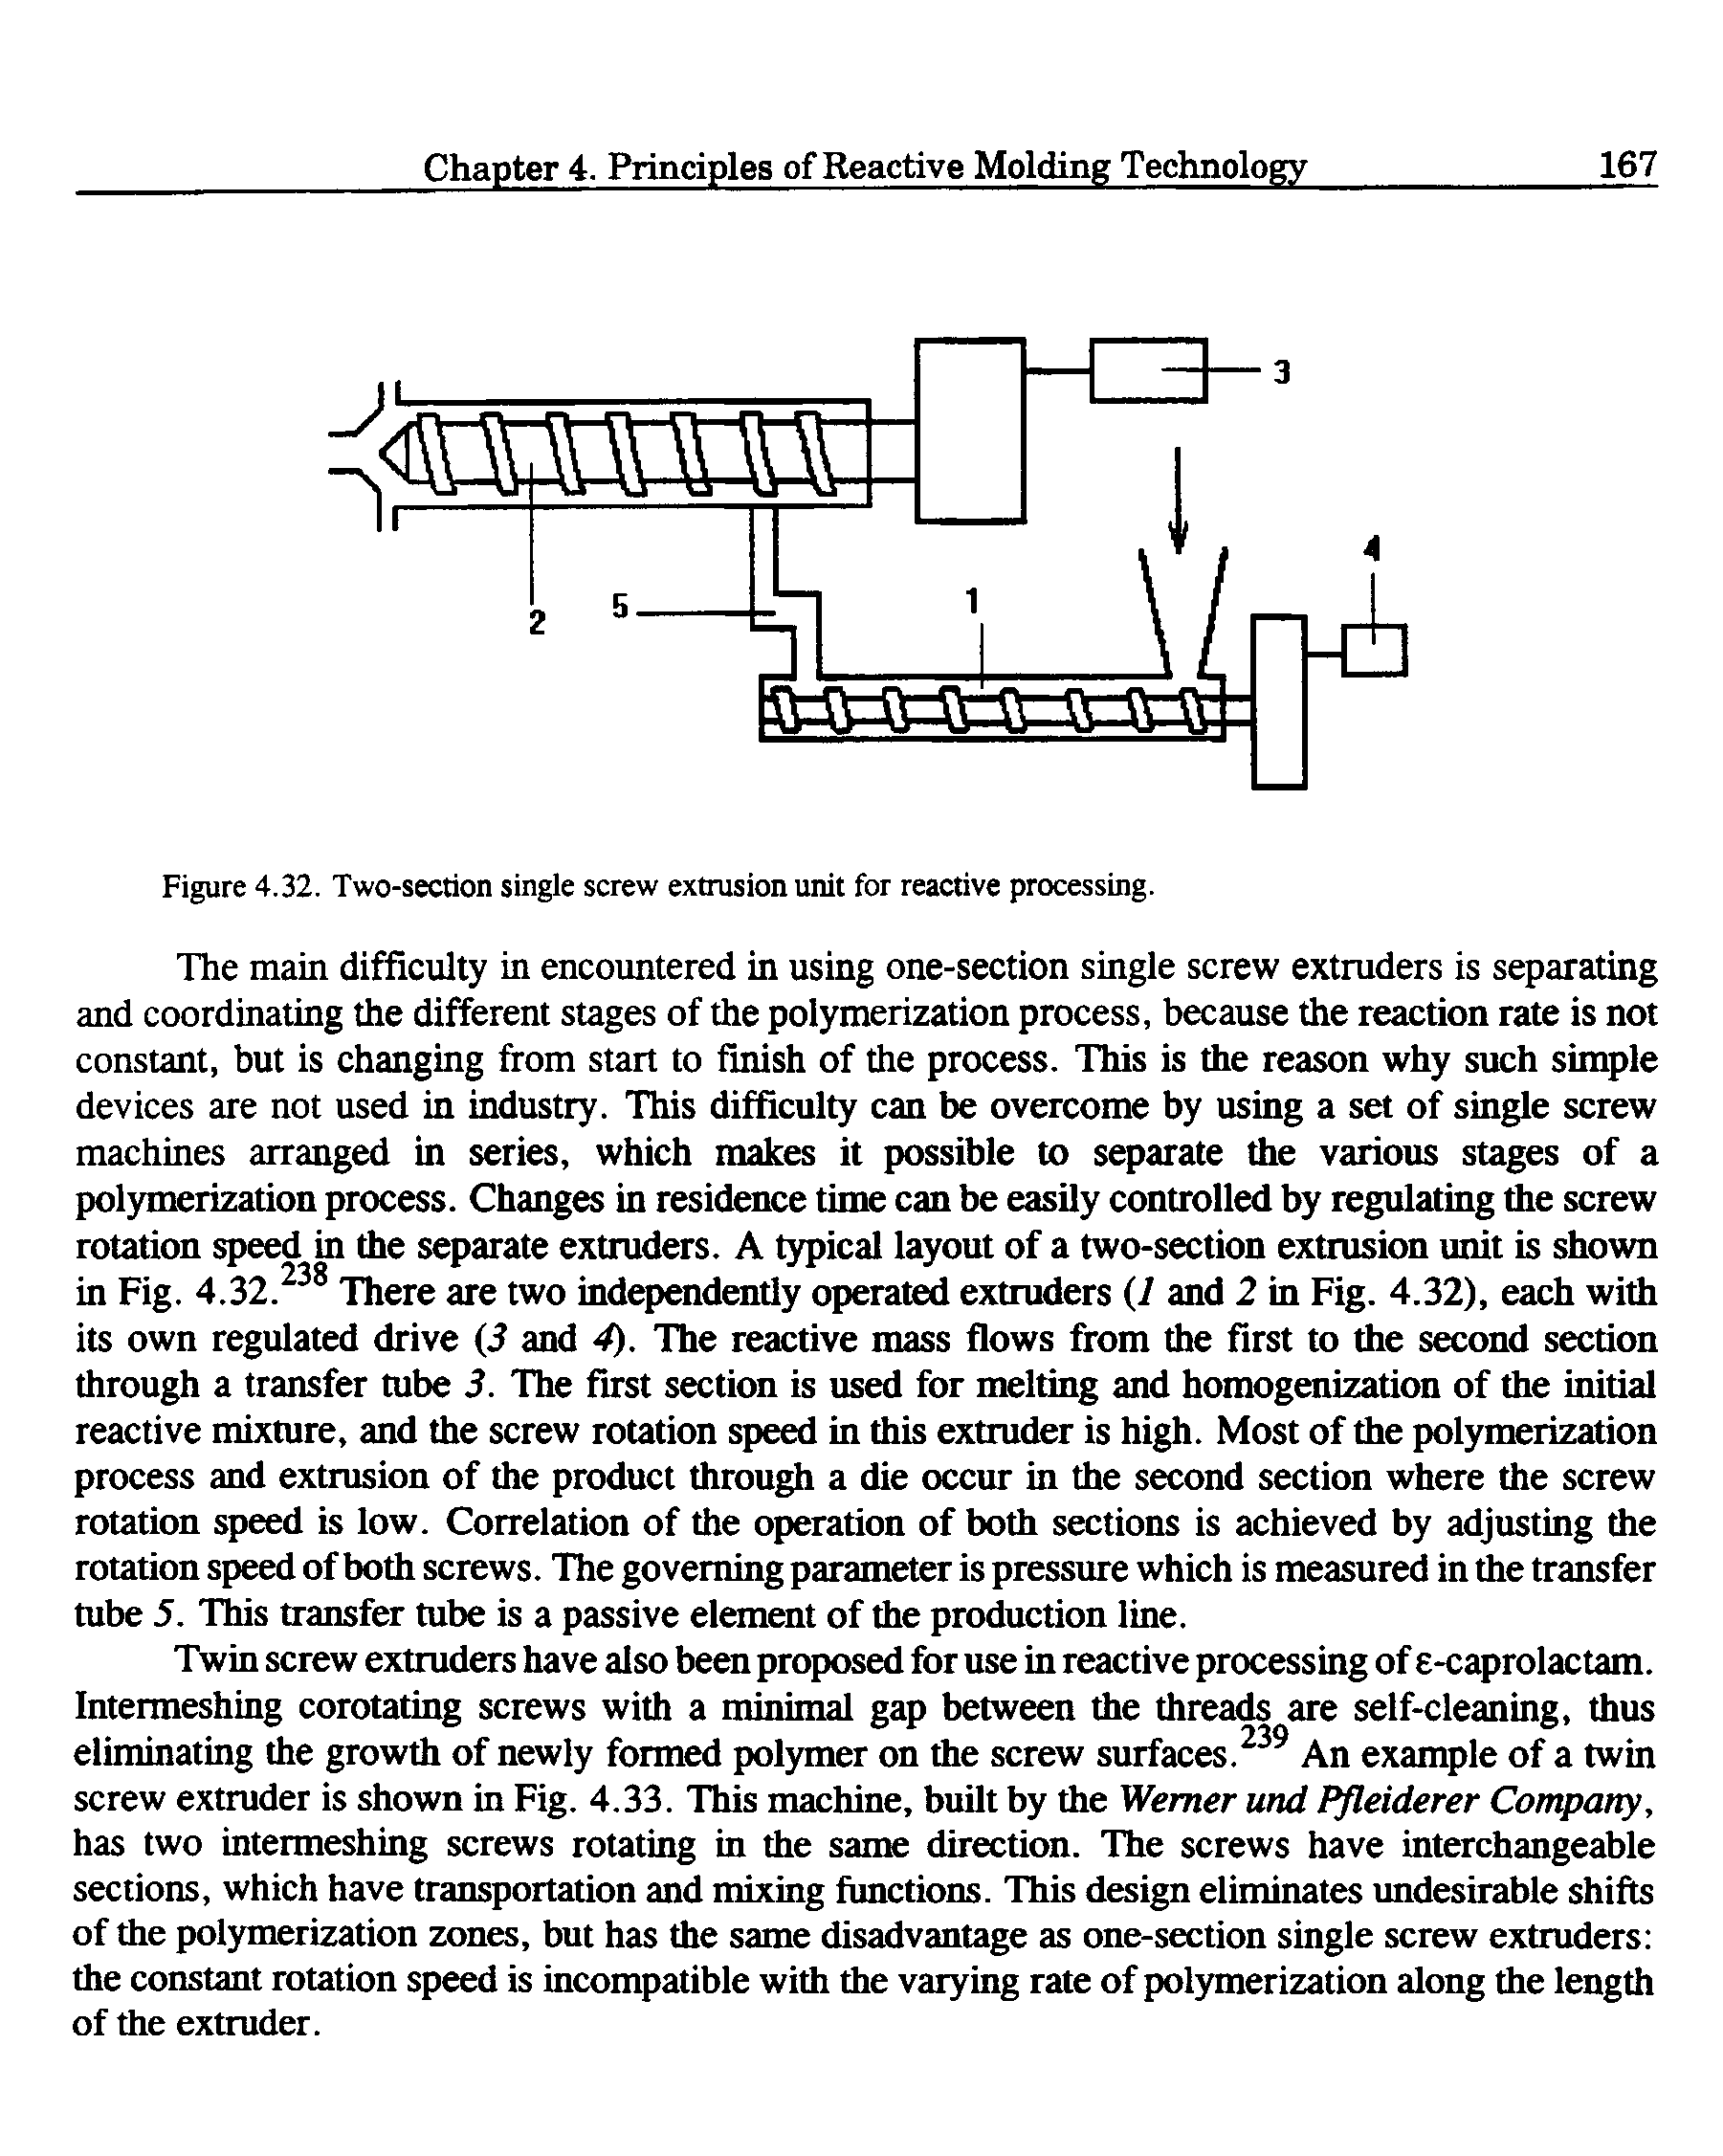 Figure 4.32. Two-section single screw extrusion unit for reactive processing.